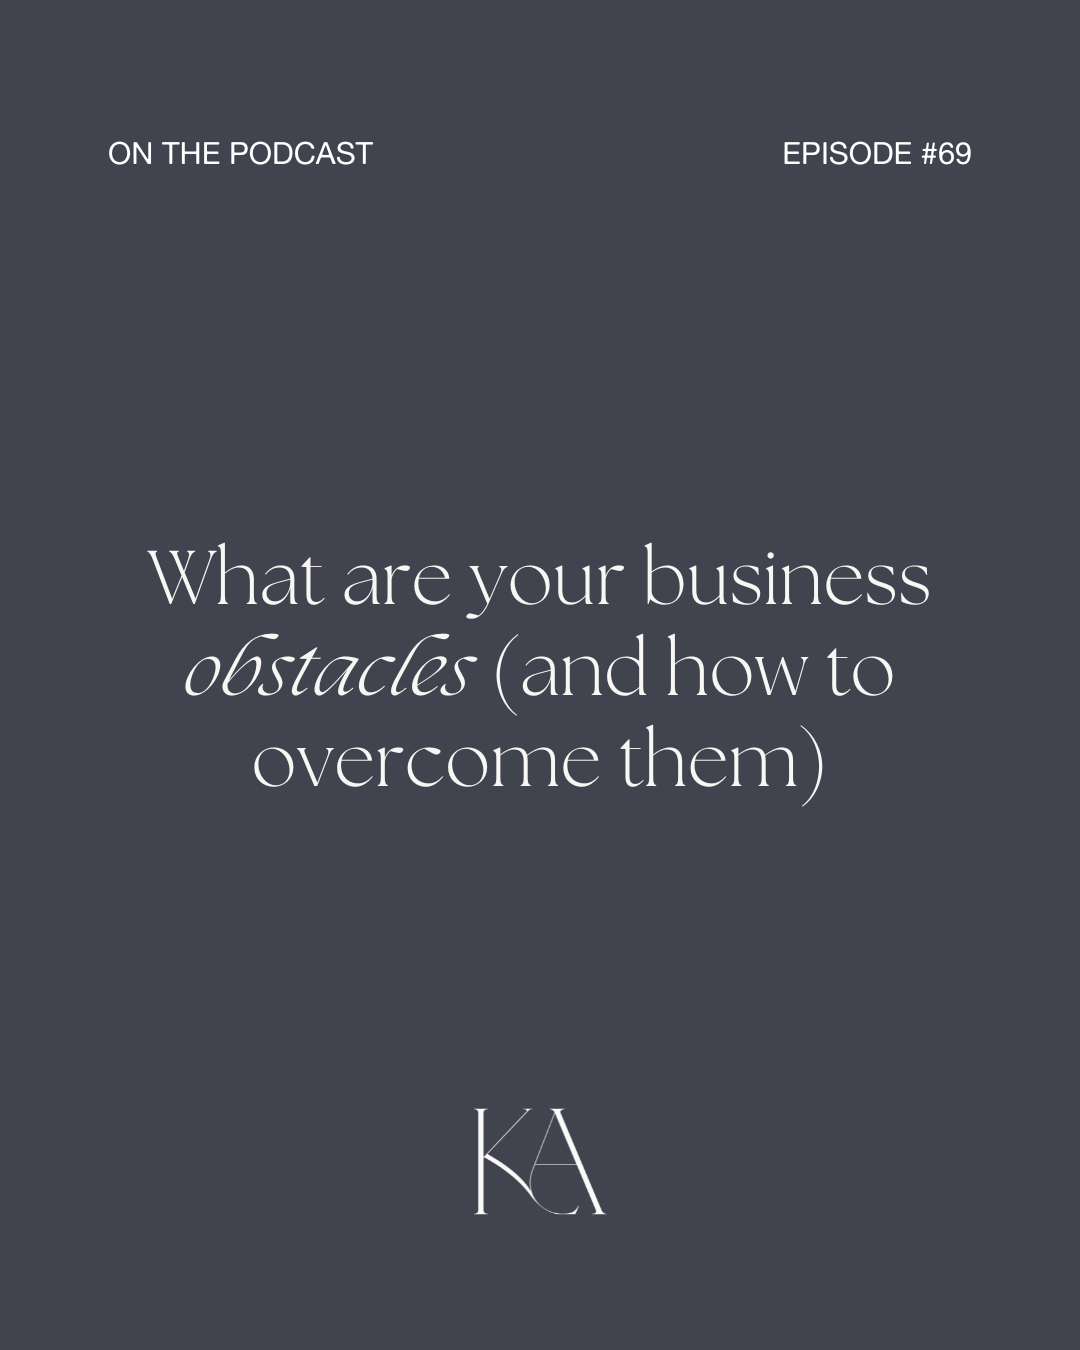 69. What are your business obstacles (and how to overcome them)